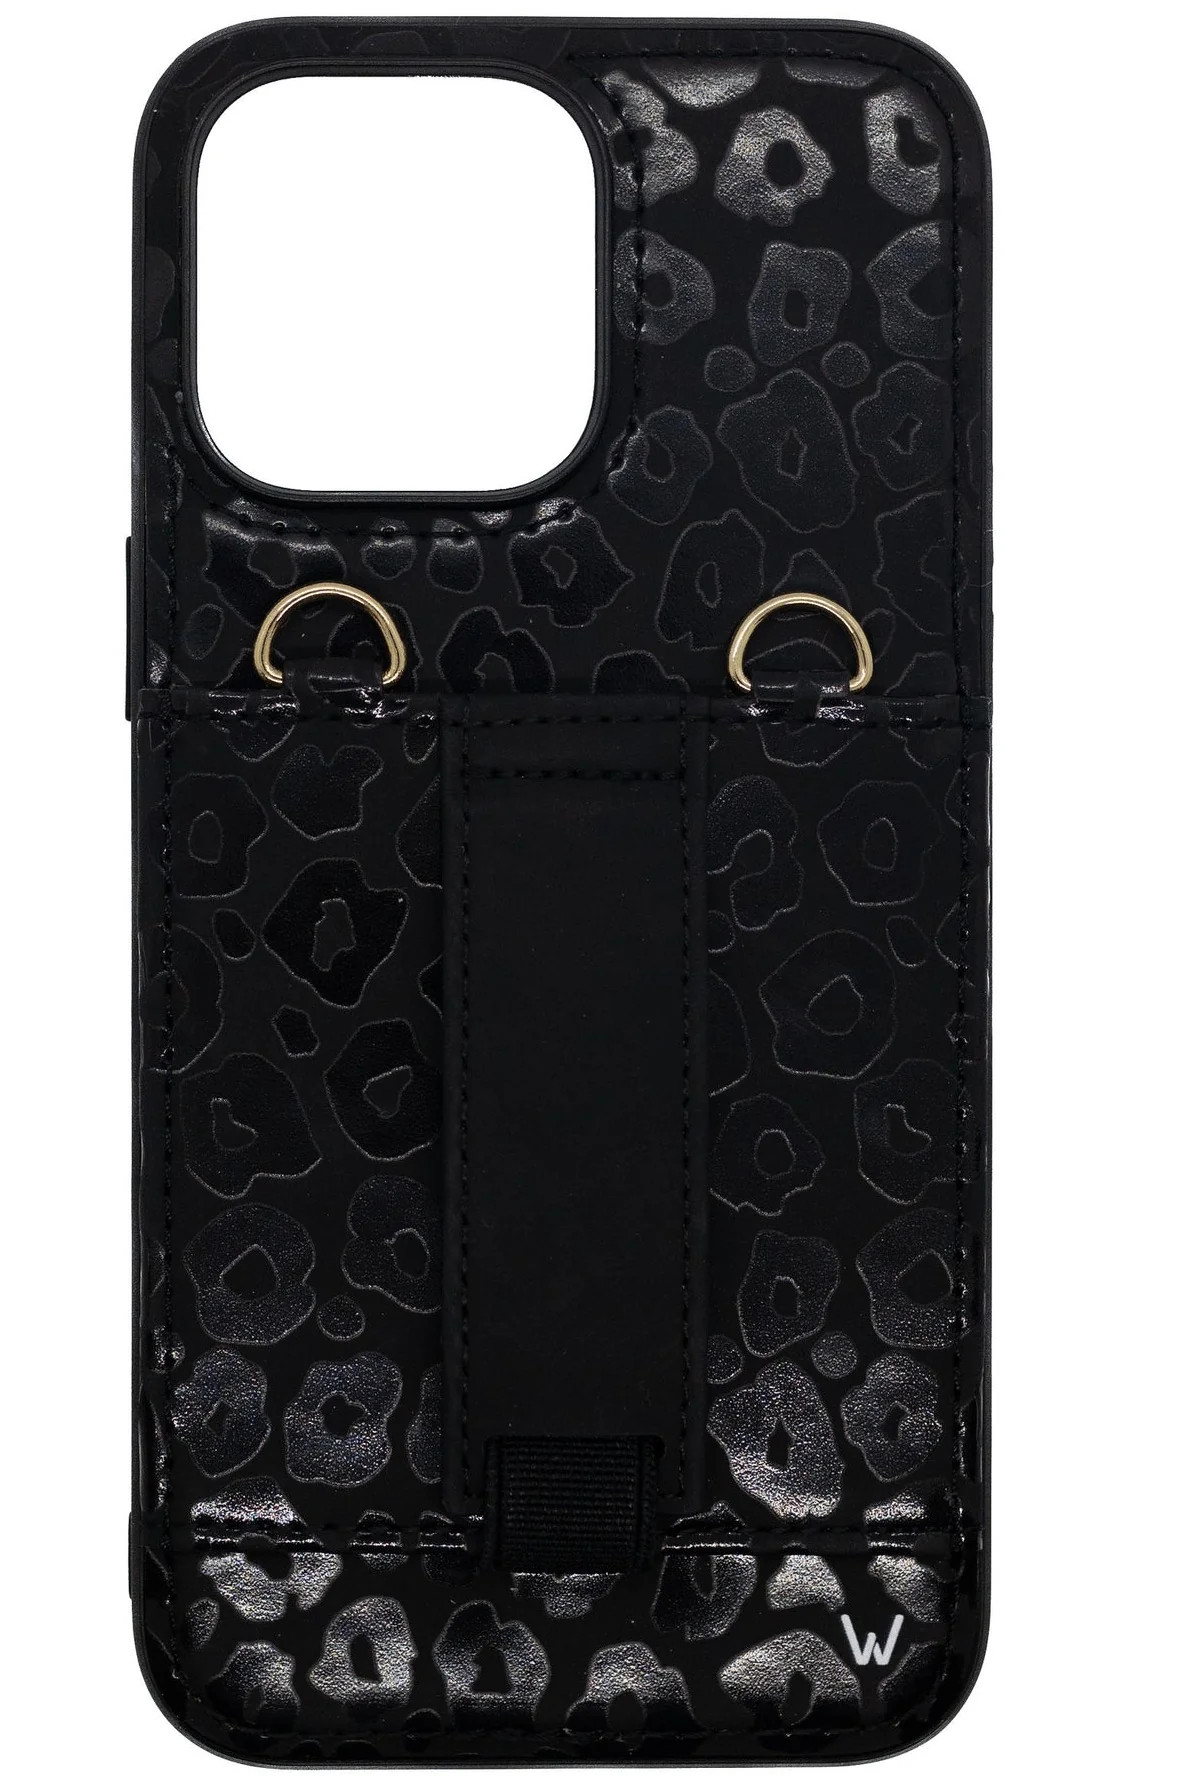 Blacked Out Leopard Purse Case | Walli Cases